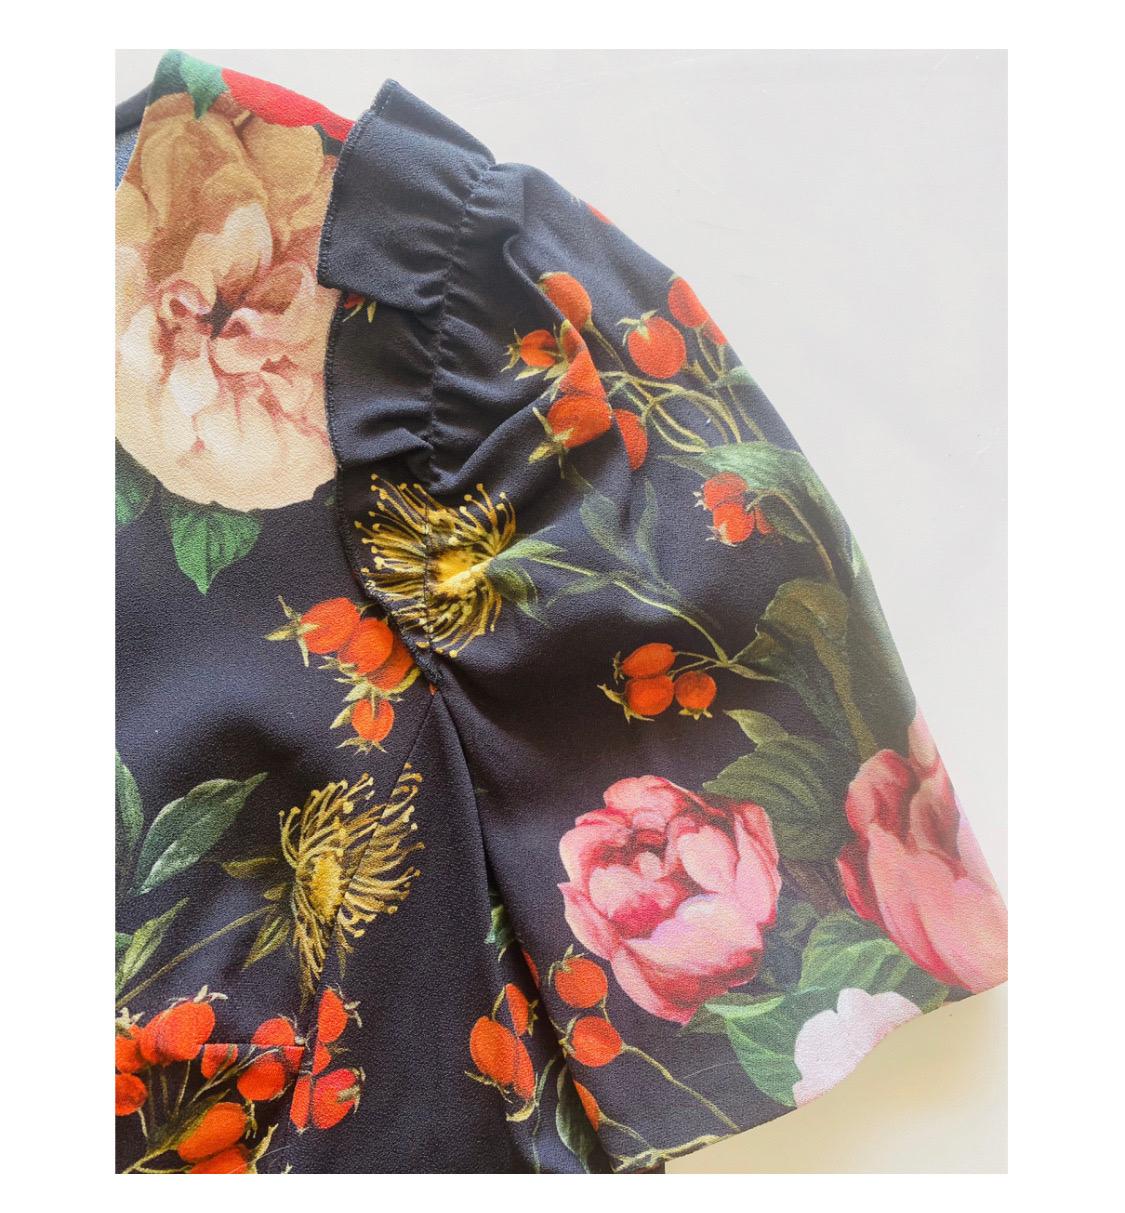 Dolce & Gabbana Floral printed top
blouse

Size 42IT, UK10, M


Viscose / Elasthan

Brand new with tags!

Please check my other DG clothing &

accessories!
